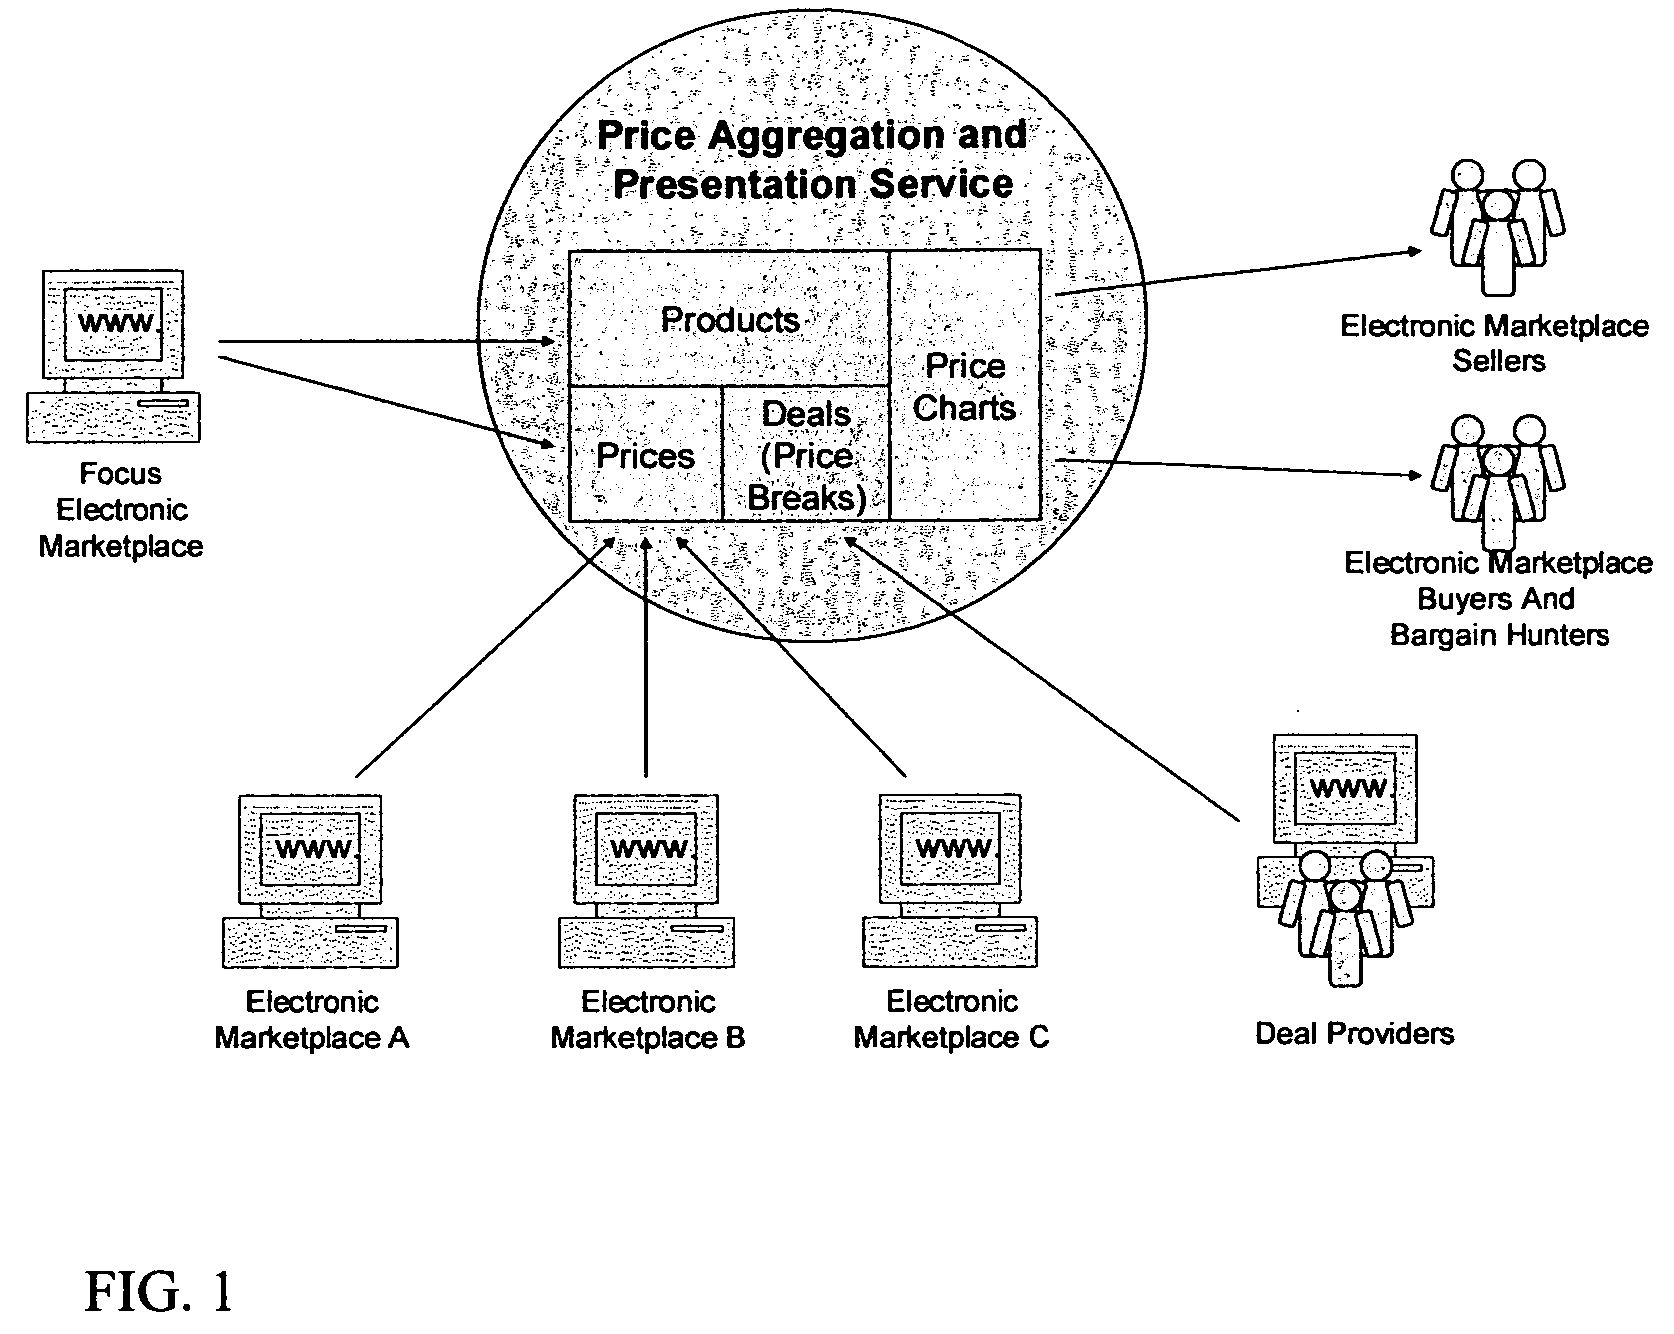 System and method for monitoring, aggregation and presentation of product prices collected from multiple electronic marketplaces